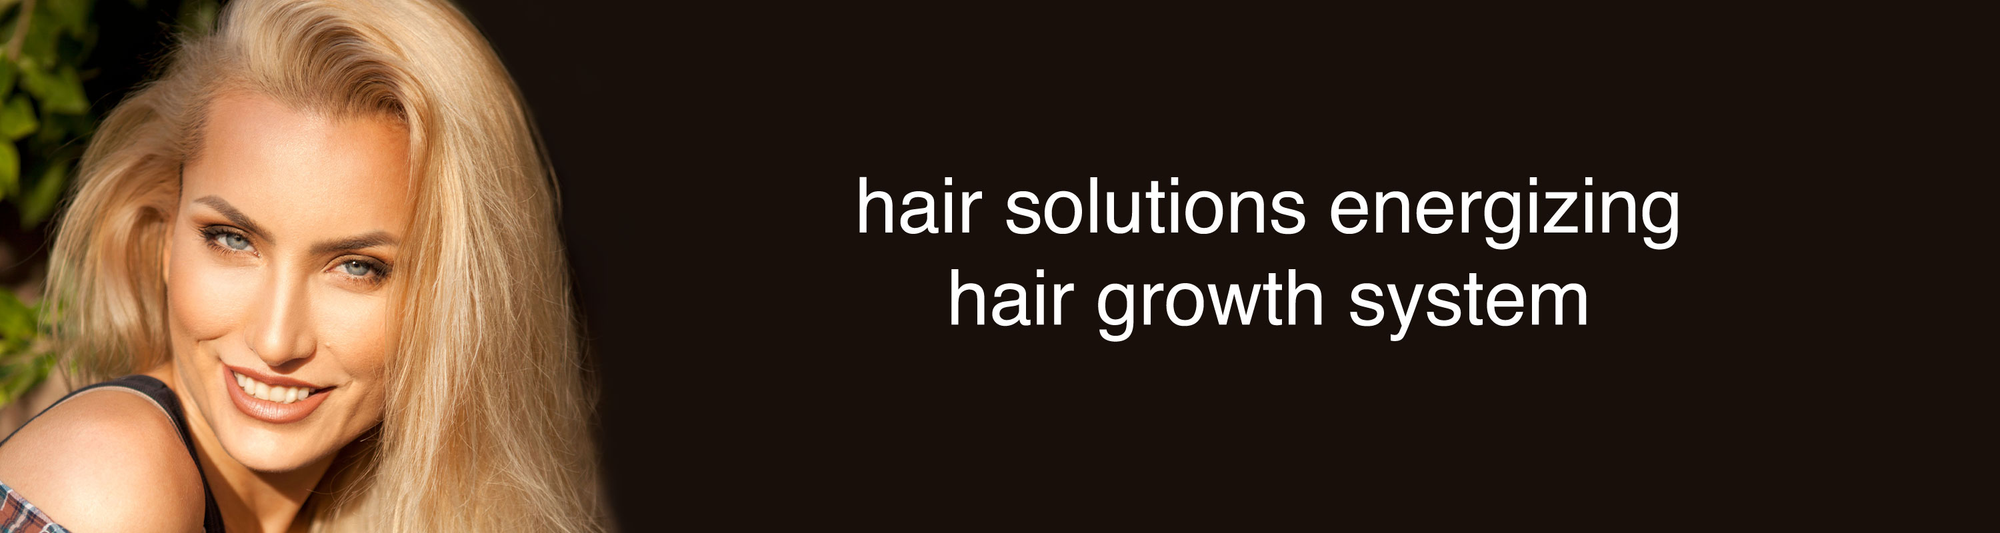 Hair Solutions Energizing Hair Growth System